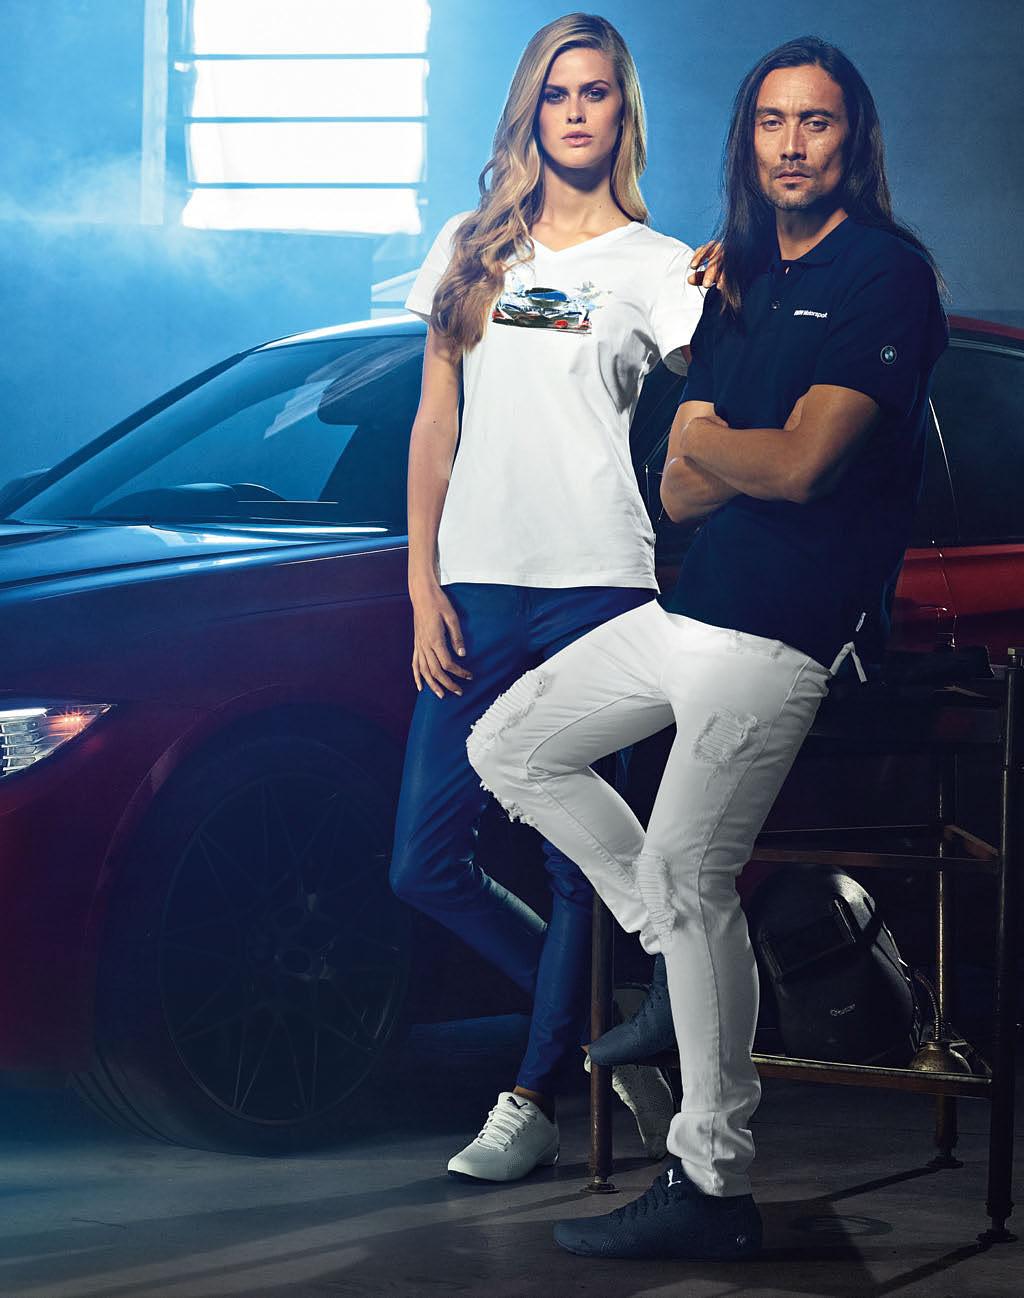 BMW LIFESTYLE I BMW MOTORSPORT COLLECTION BMW Motorsport Polo Shirt, ladies. Tailored polo shirt with five-button placket. Mesh-look BMW Motorsport stripes on the front.